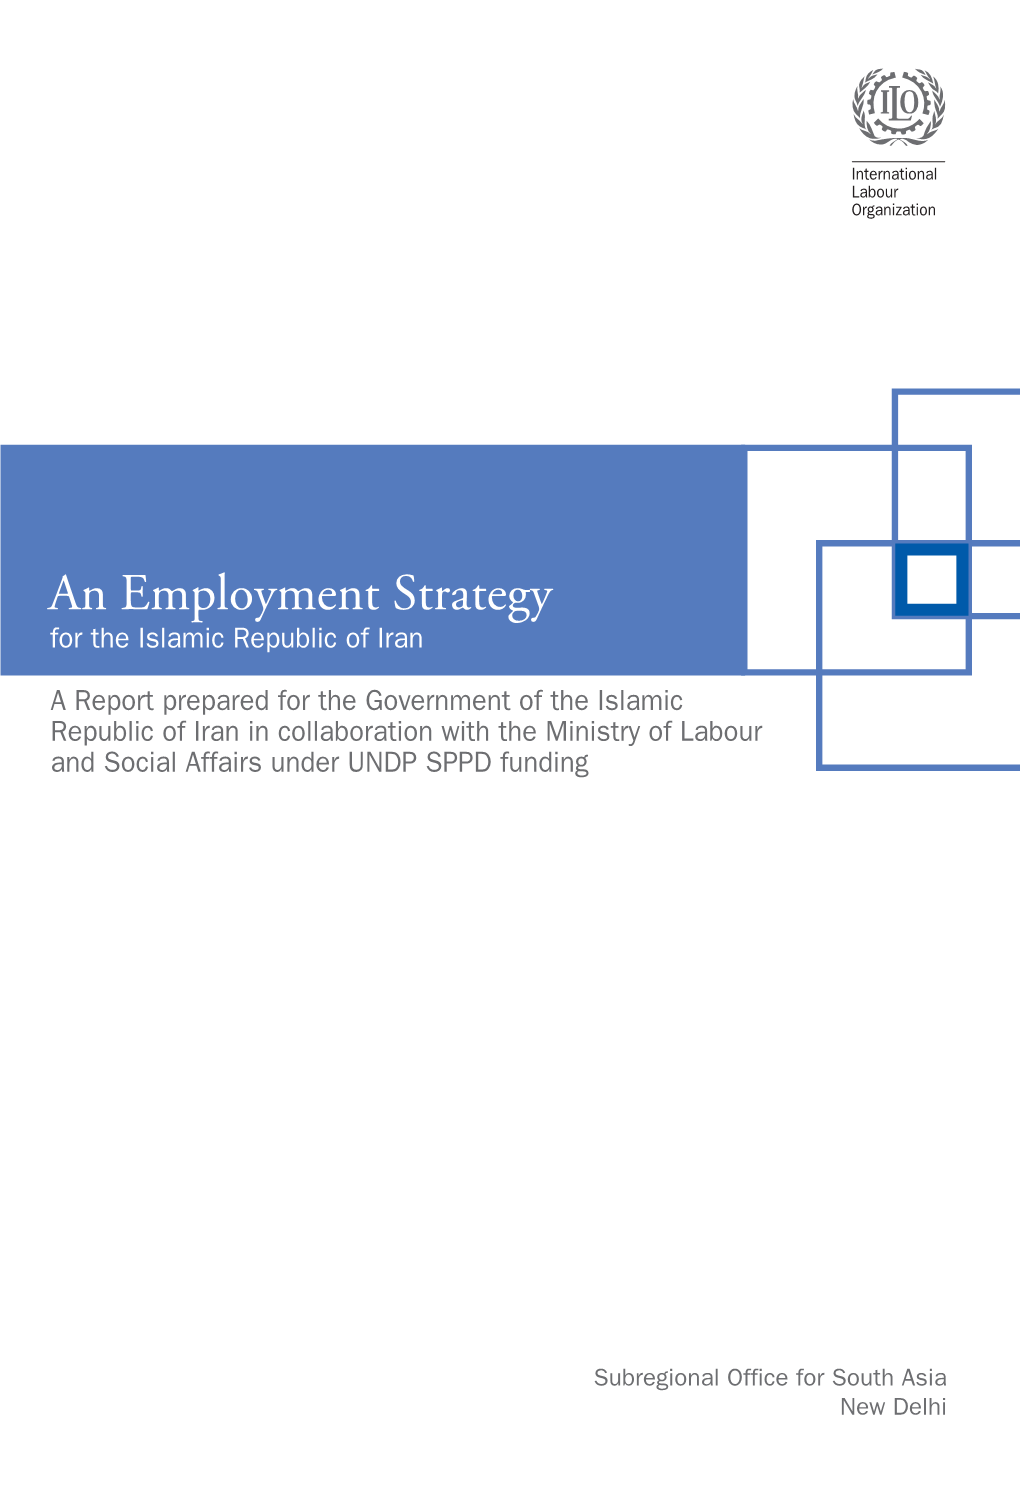 An Employment Strategy for the Islamic Republic of Iranpdf